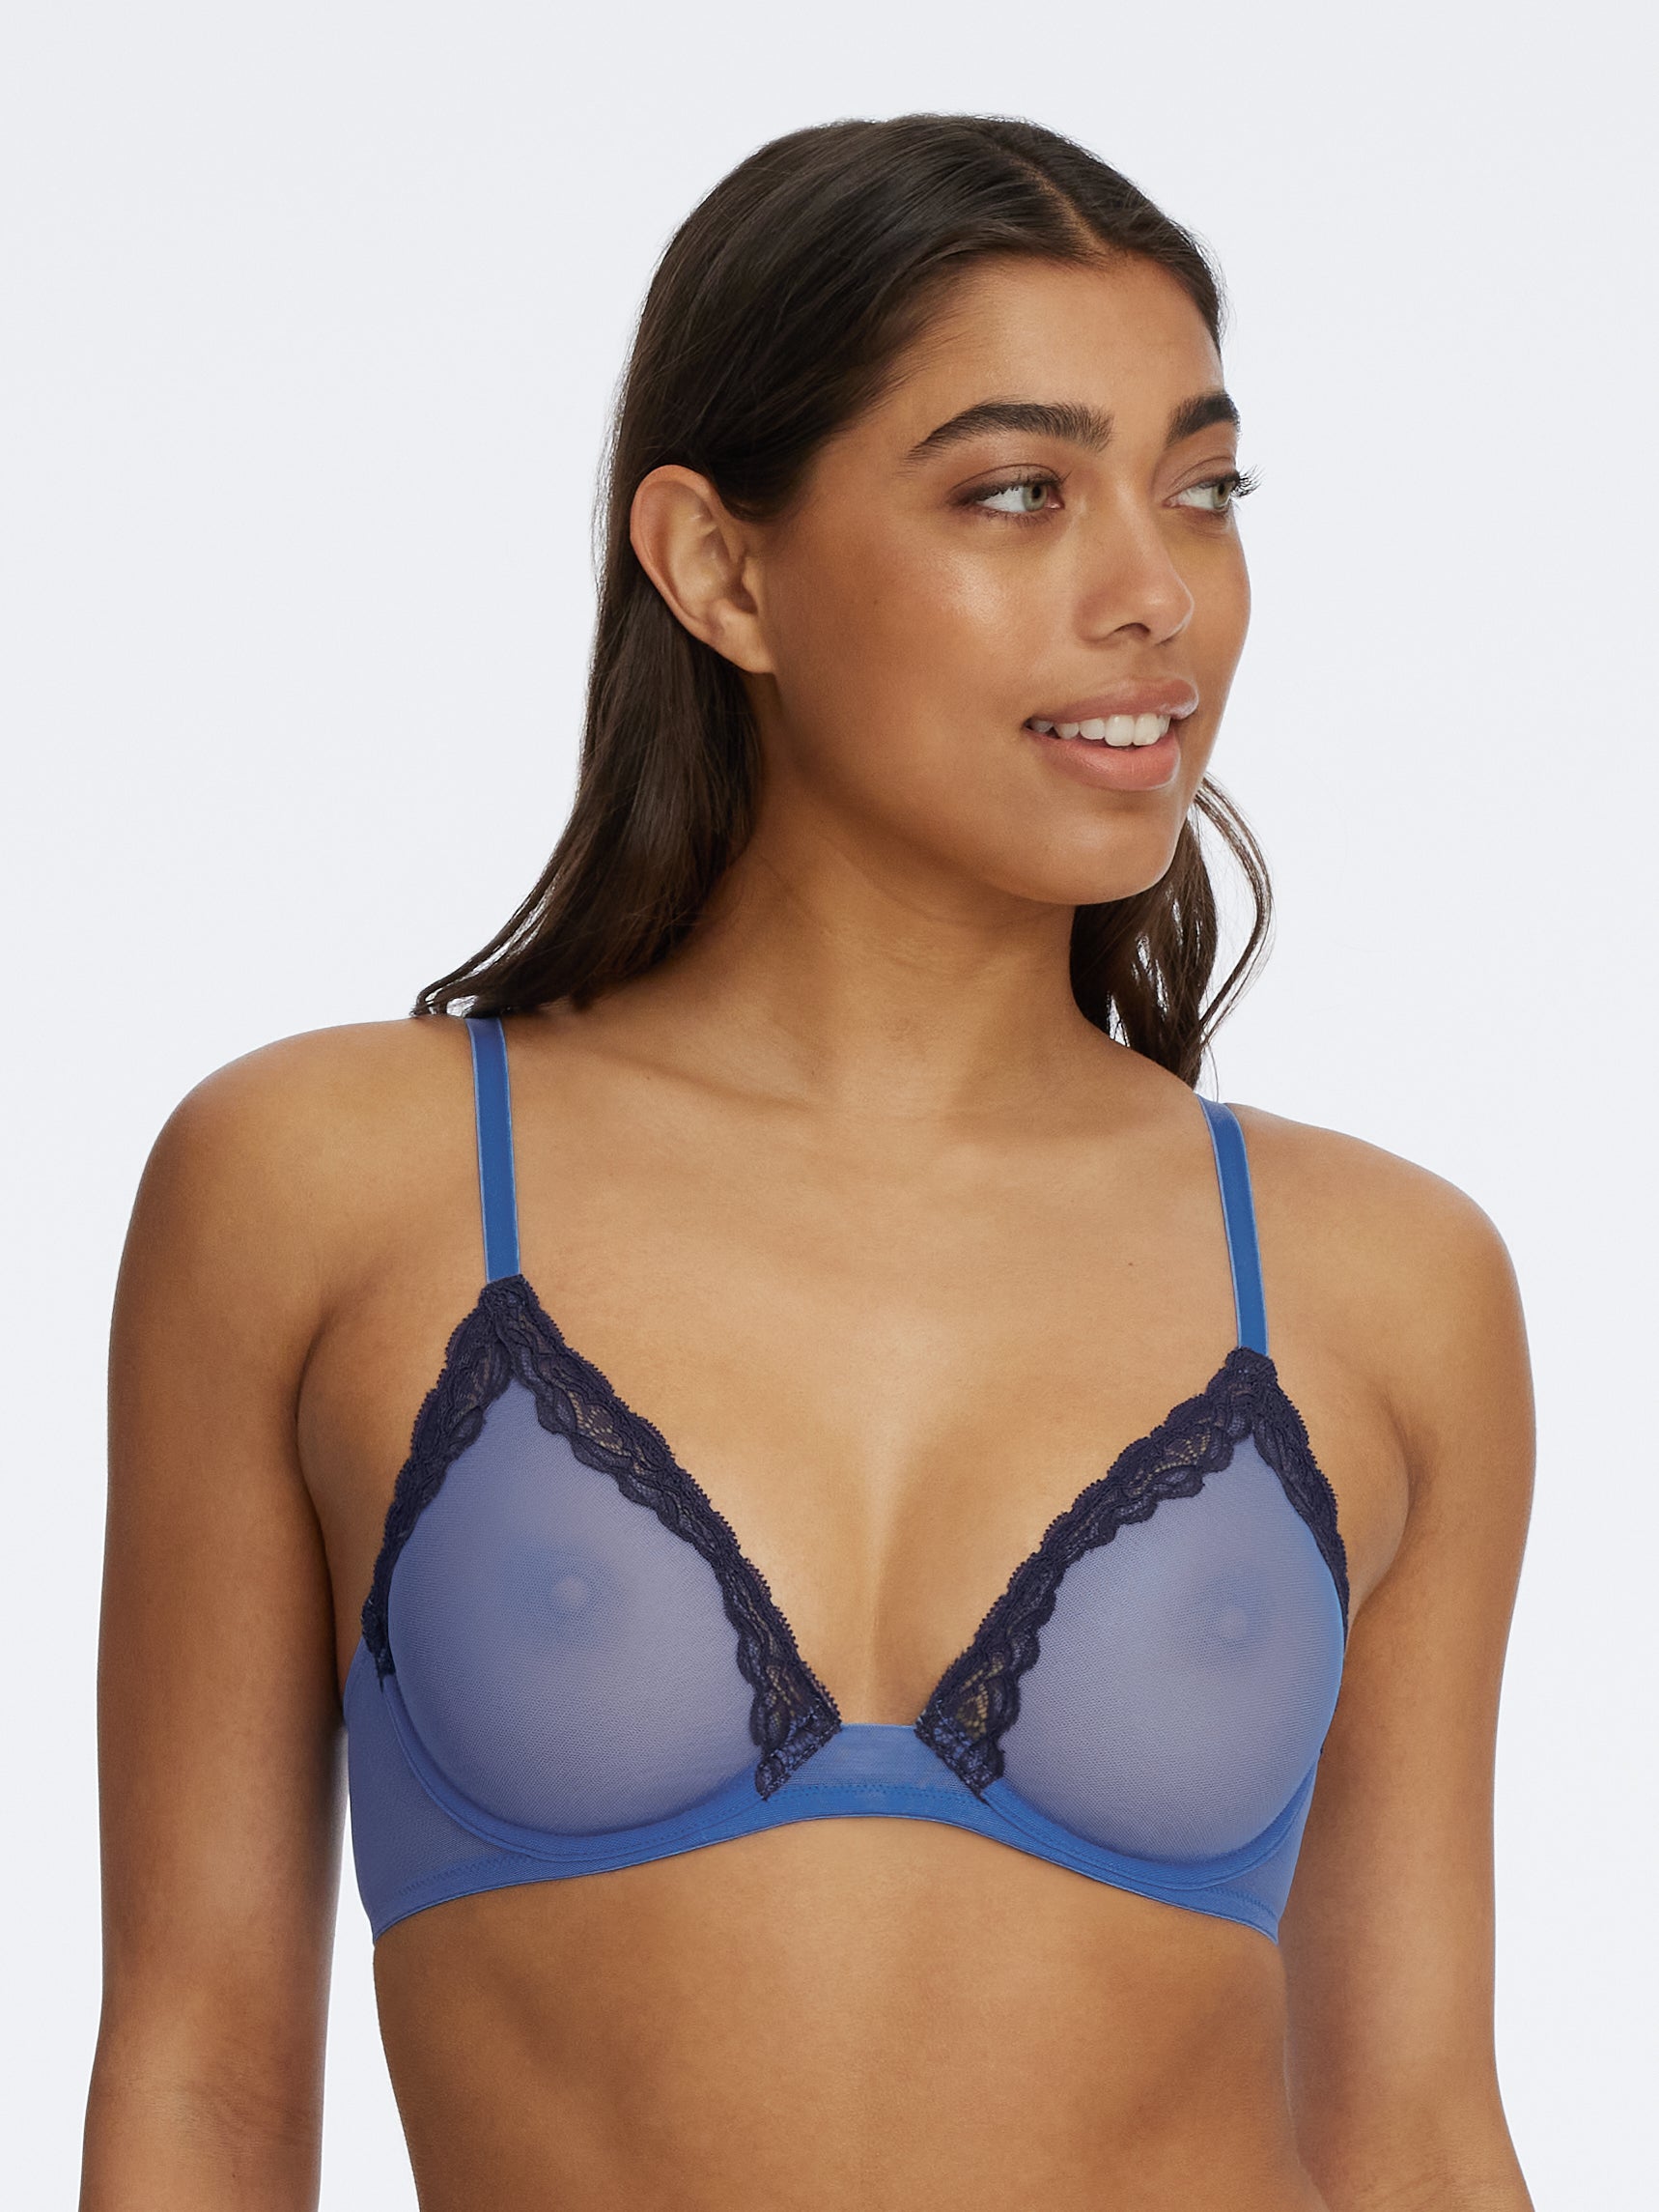 WingsLove Women's Sexy 1/2 Cup Balconette Mesh Underwired Lace Bra